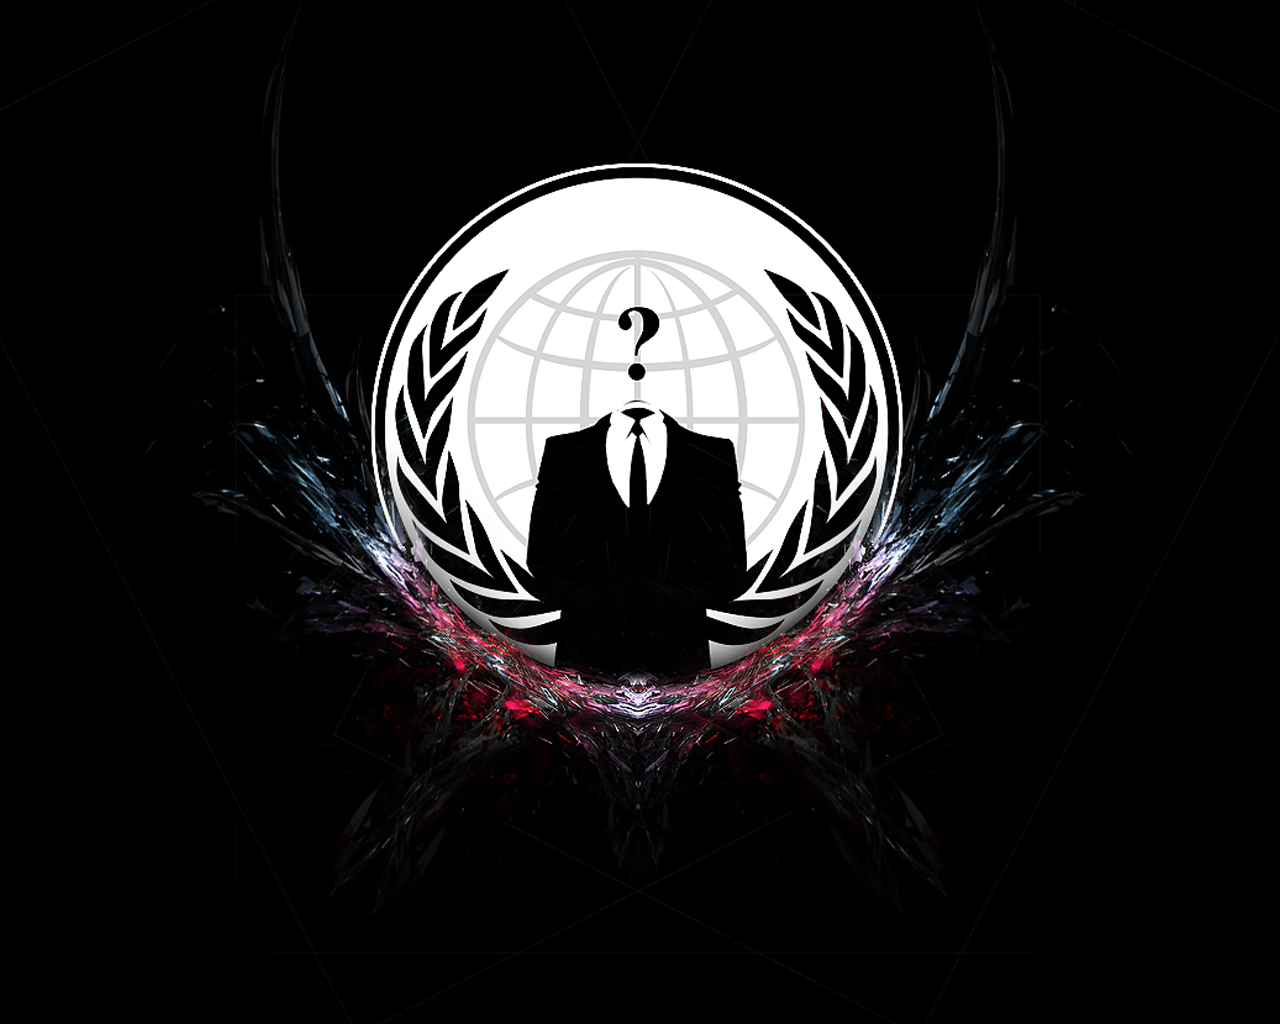 anonymous, technology lock screen backgrounds